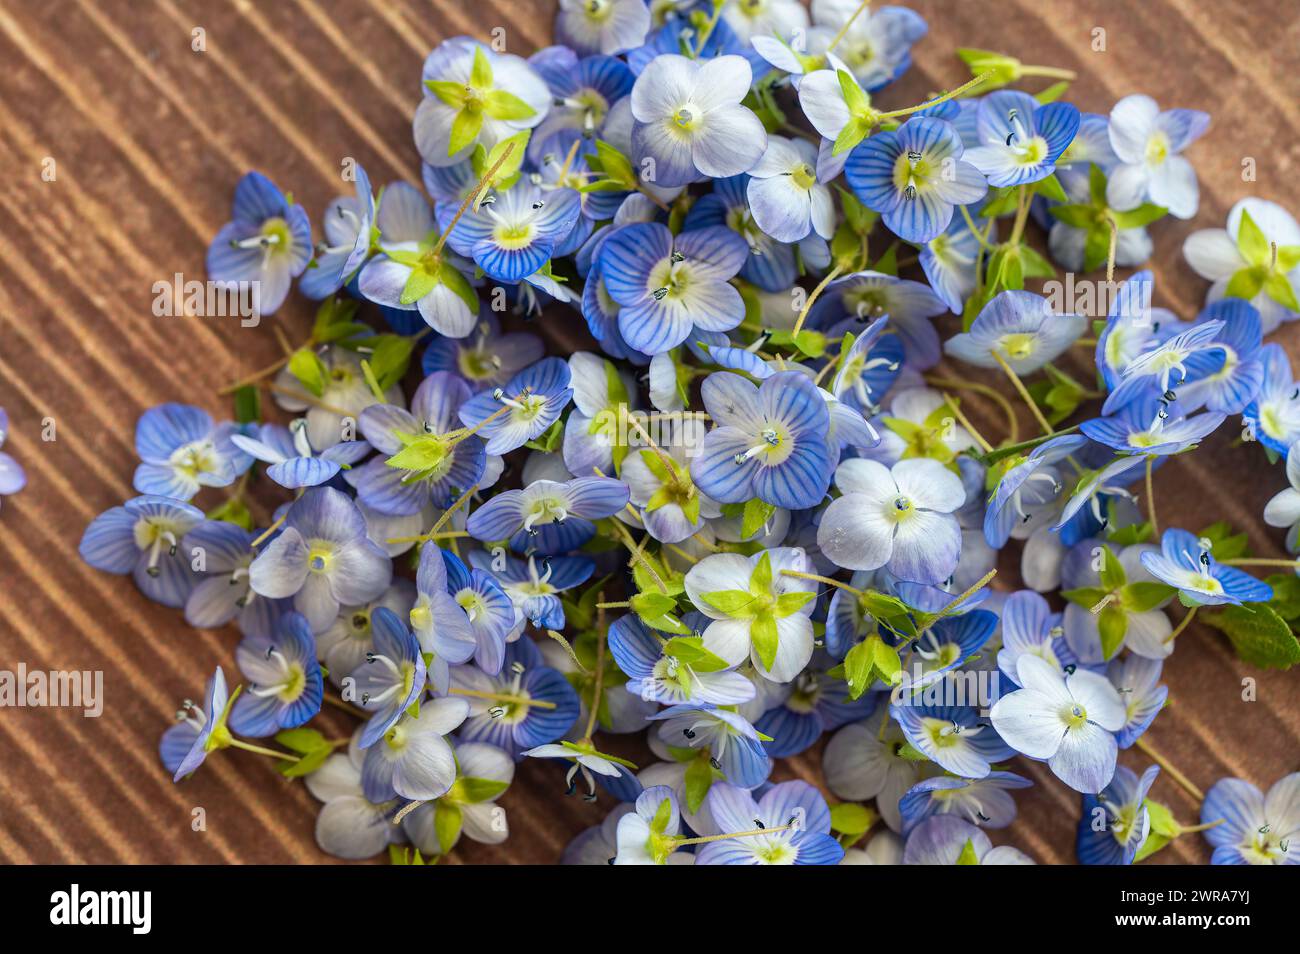 Blue wildflowers collected from nature. Veronica polita. Stock Photo